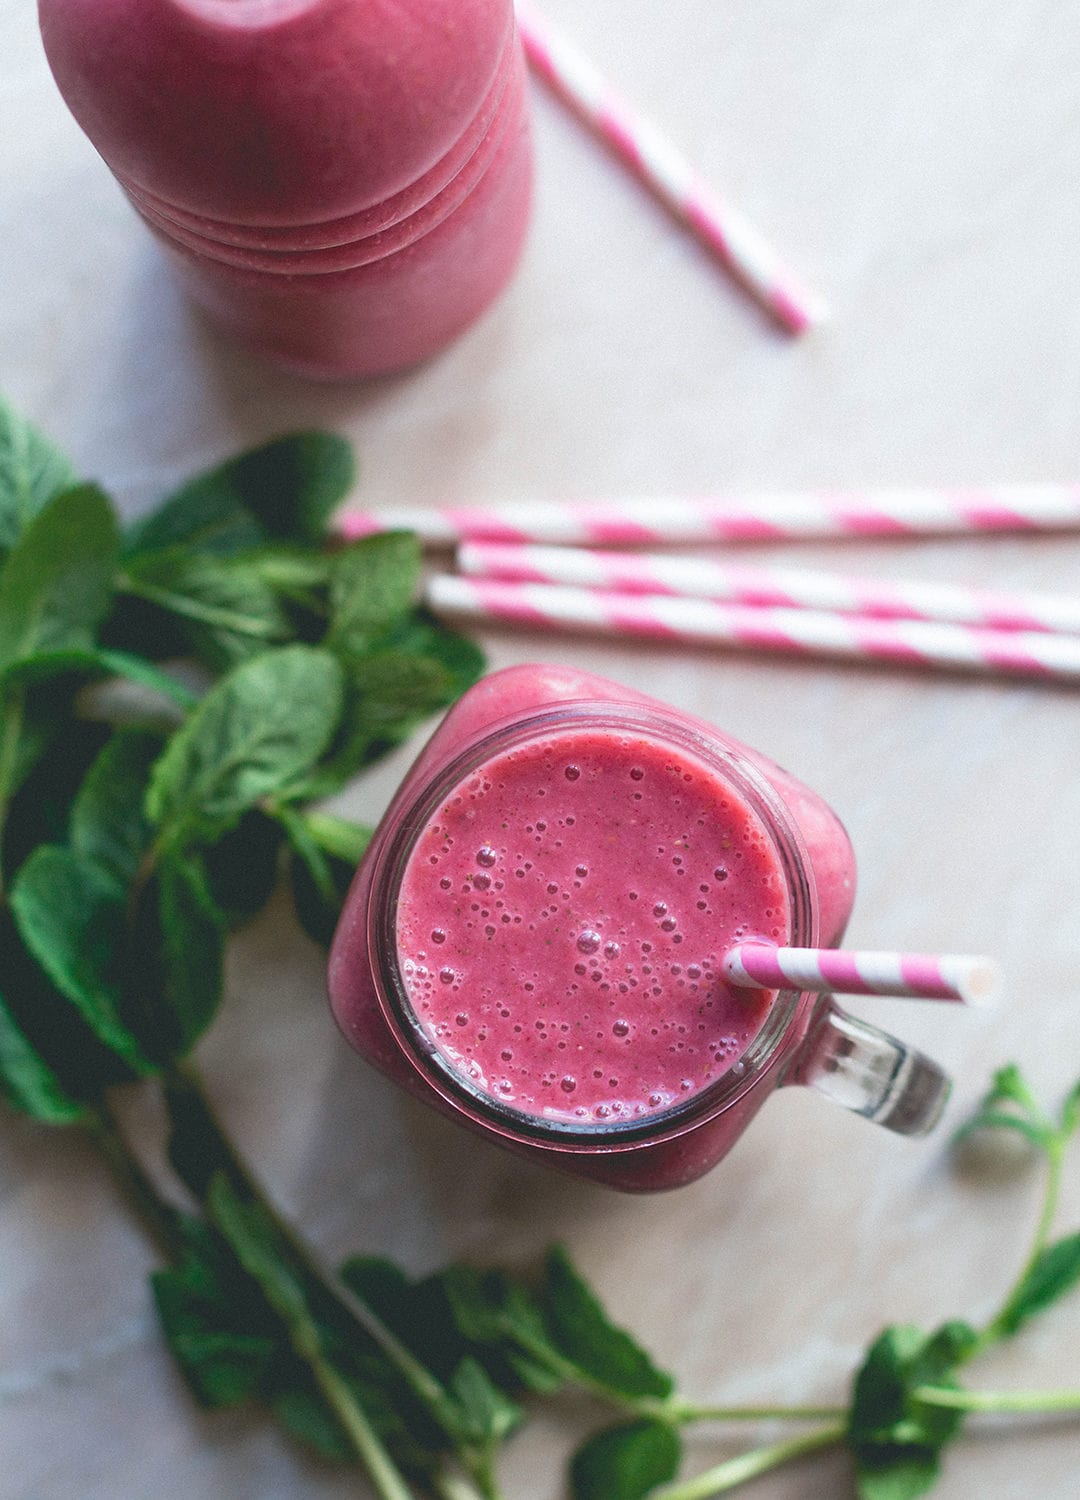 Refreshing Raspberry Mint Smoothie (raw vegan) - the most delicious refreshing smoothie to start your day with or have as a sweet snack during the day. Such an easy recipe! Mint, banana, berries, coconut, water, and almond milk. Delicious! | thehealthfulideas.com